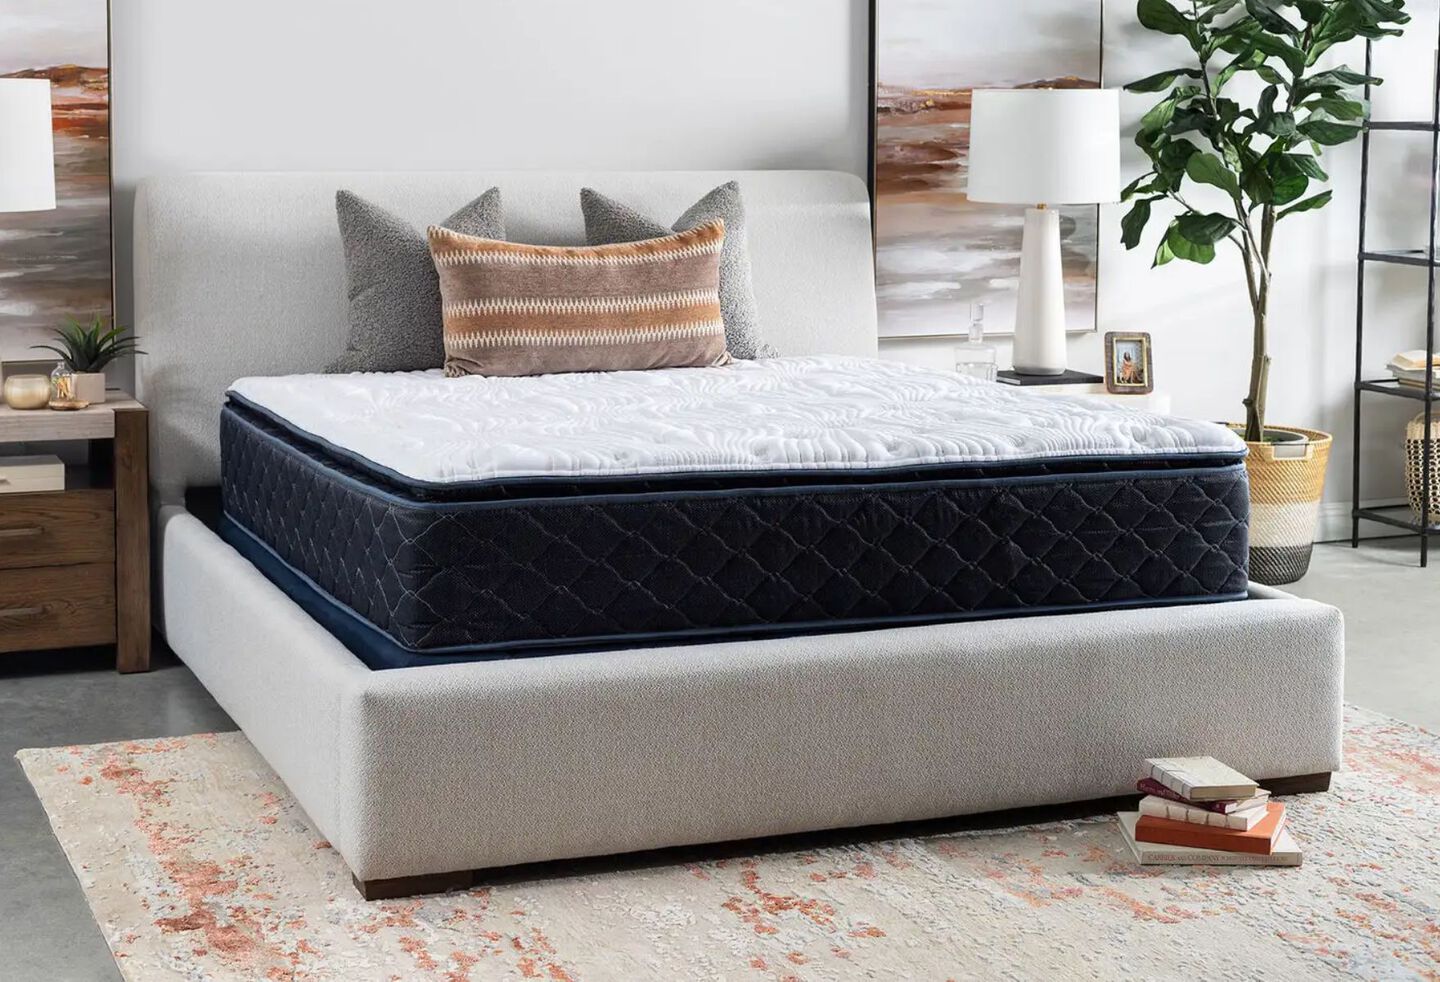 Navy blue and white mattress on top of a light grey bedframe in a bedroom